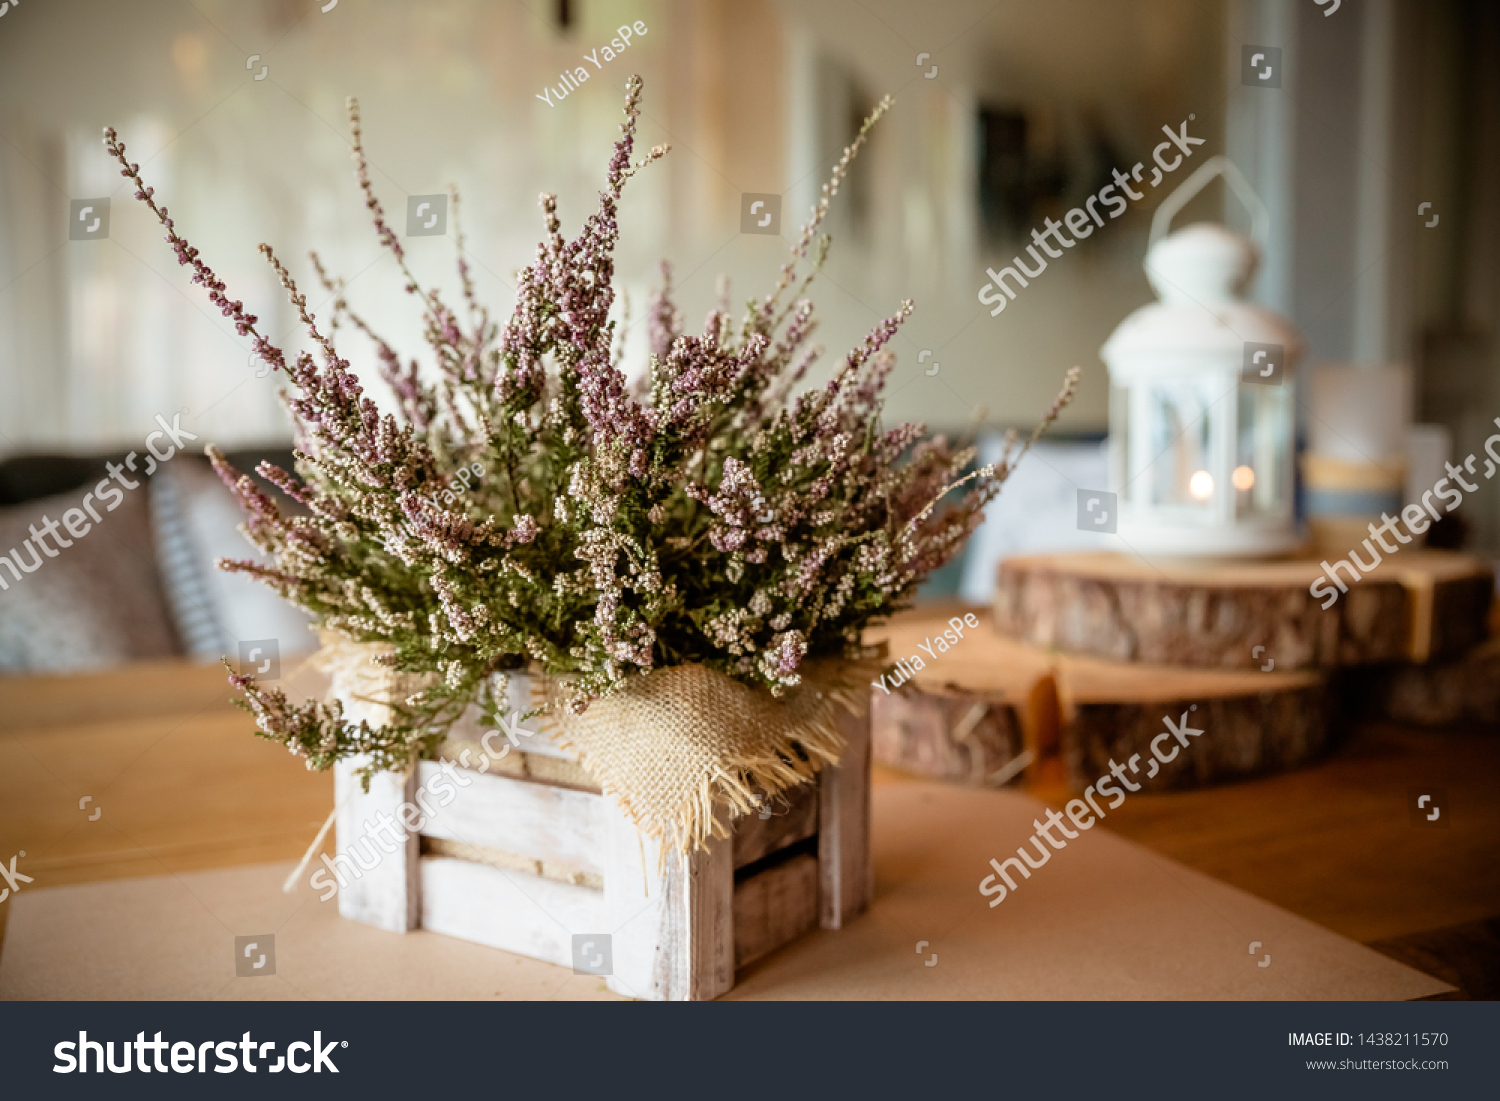 Basket with Heather on the table.heather in a basket . Autumn decorations.pink and purple flowers heather,heath in wooden box,autumn plants and lantern.country house. Seasonal decorations #1438211570